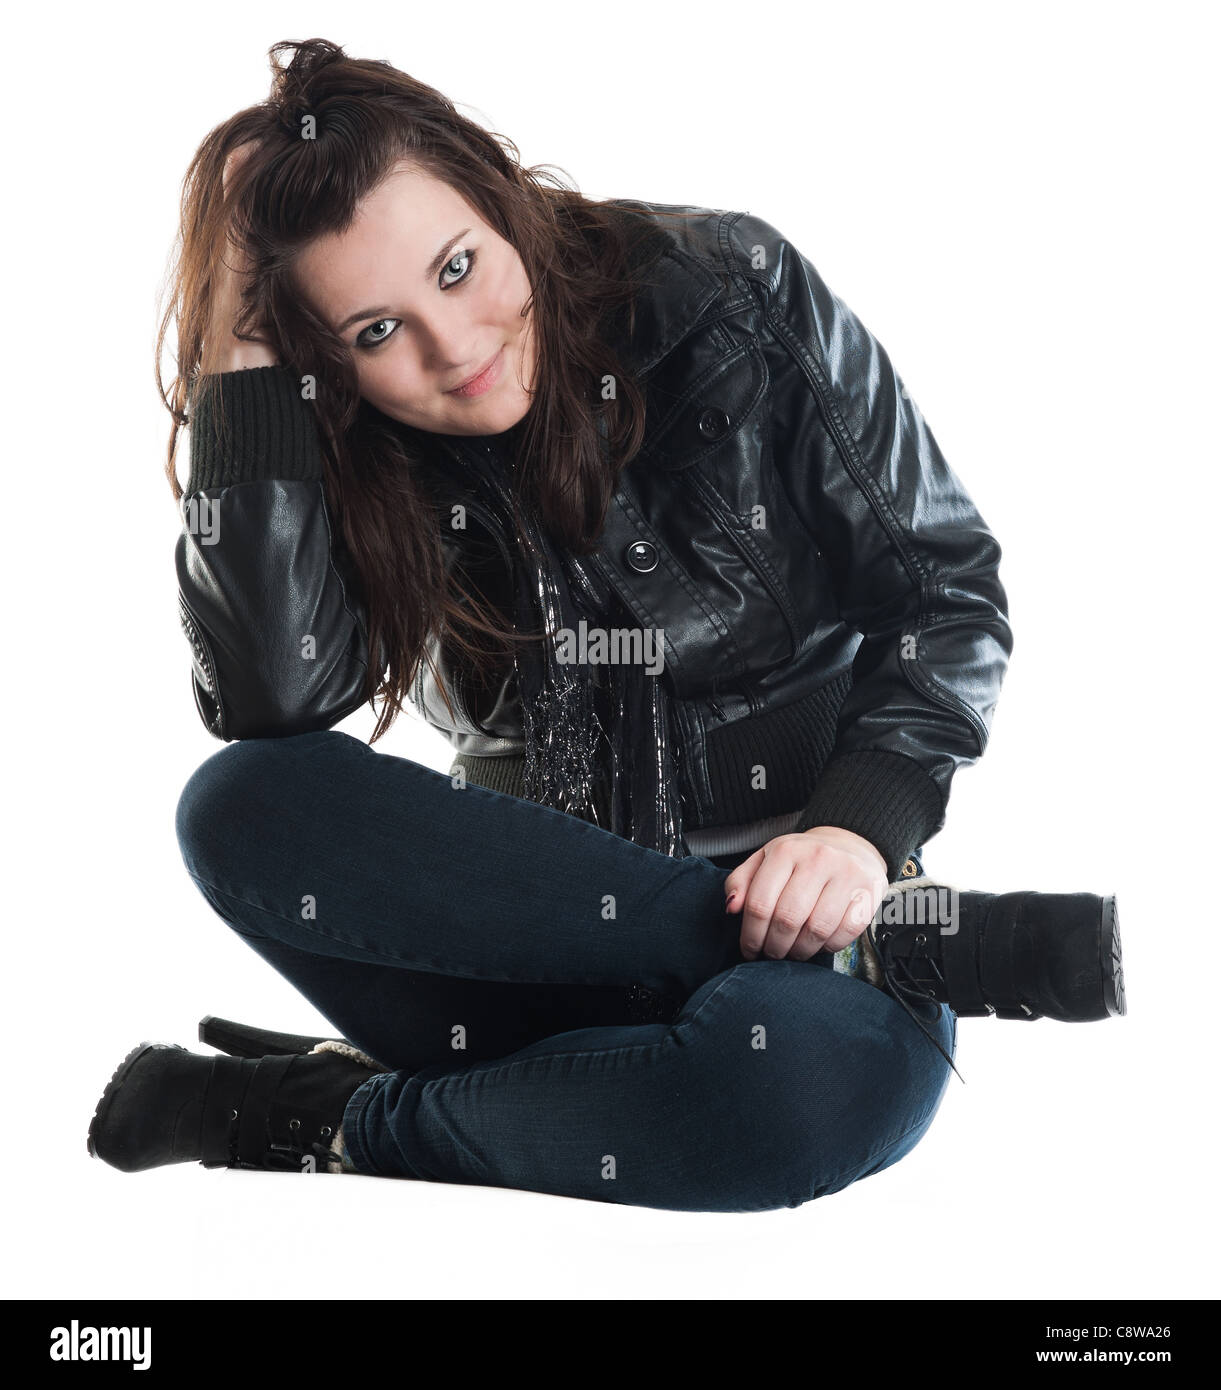 Young woman in leather jacket and blue jeans, sitting cross-legged on the floor. Stock Photo